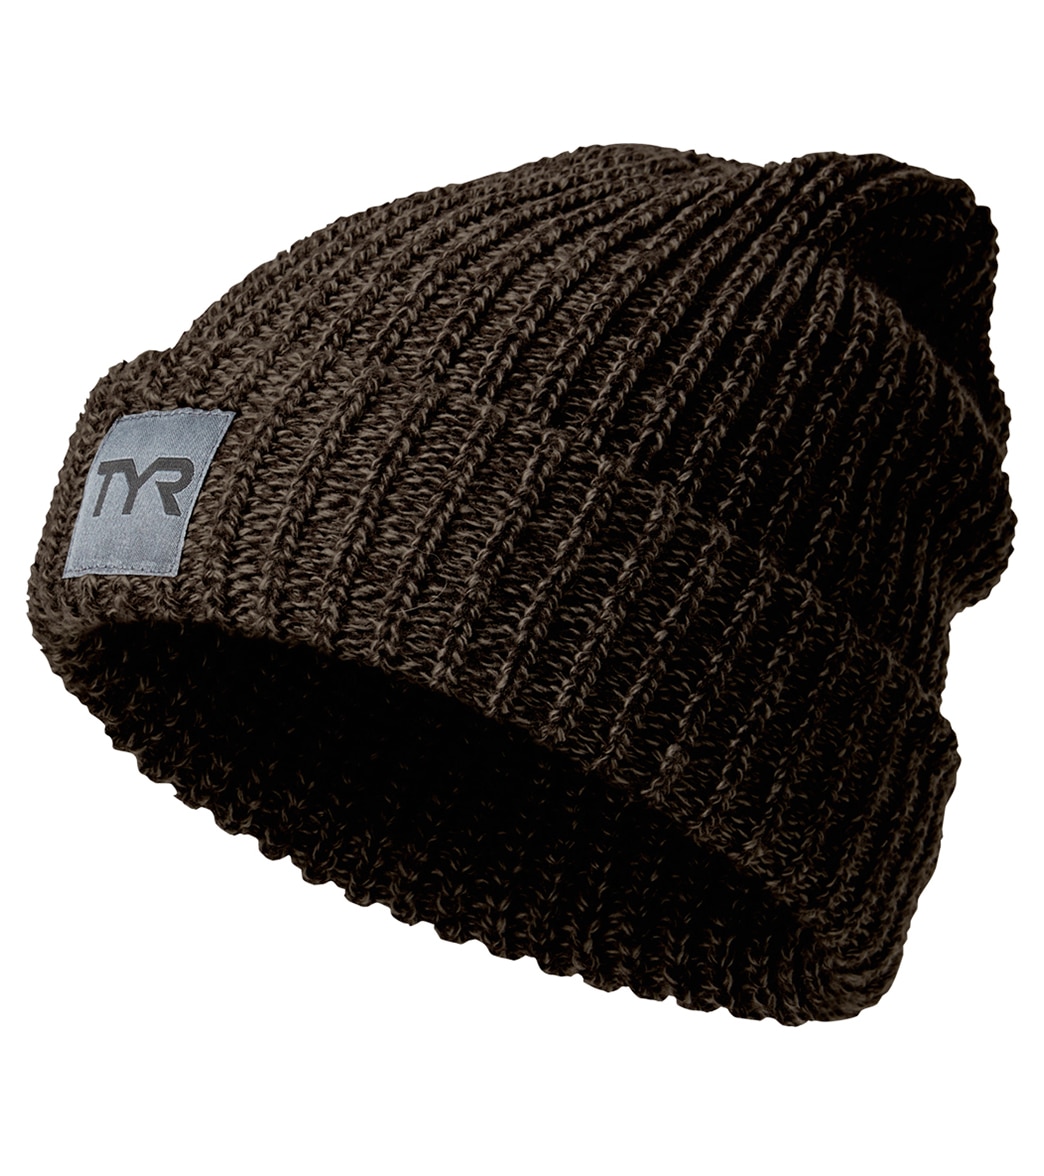 TYR Cuffed Ribbed Beanie - Brown One Size - Swimoutlet.com